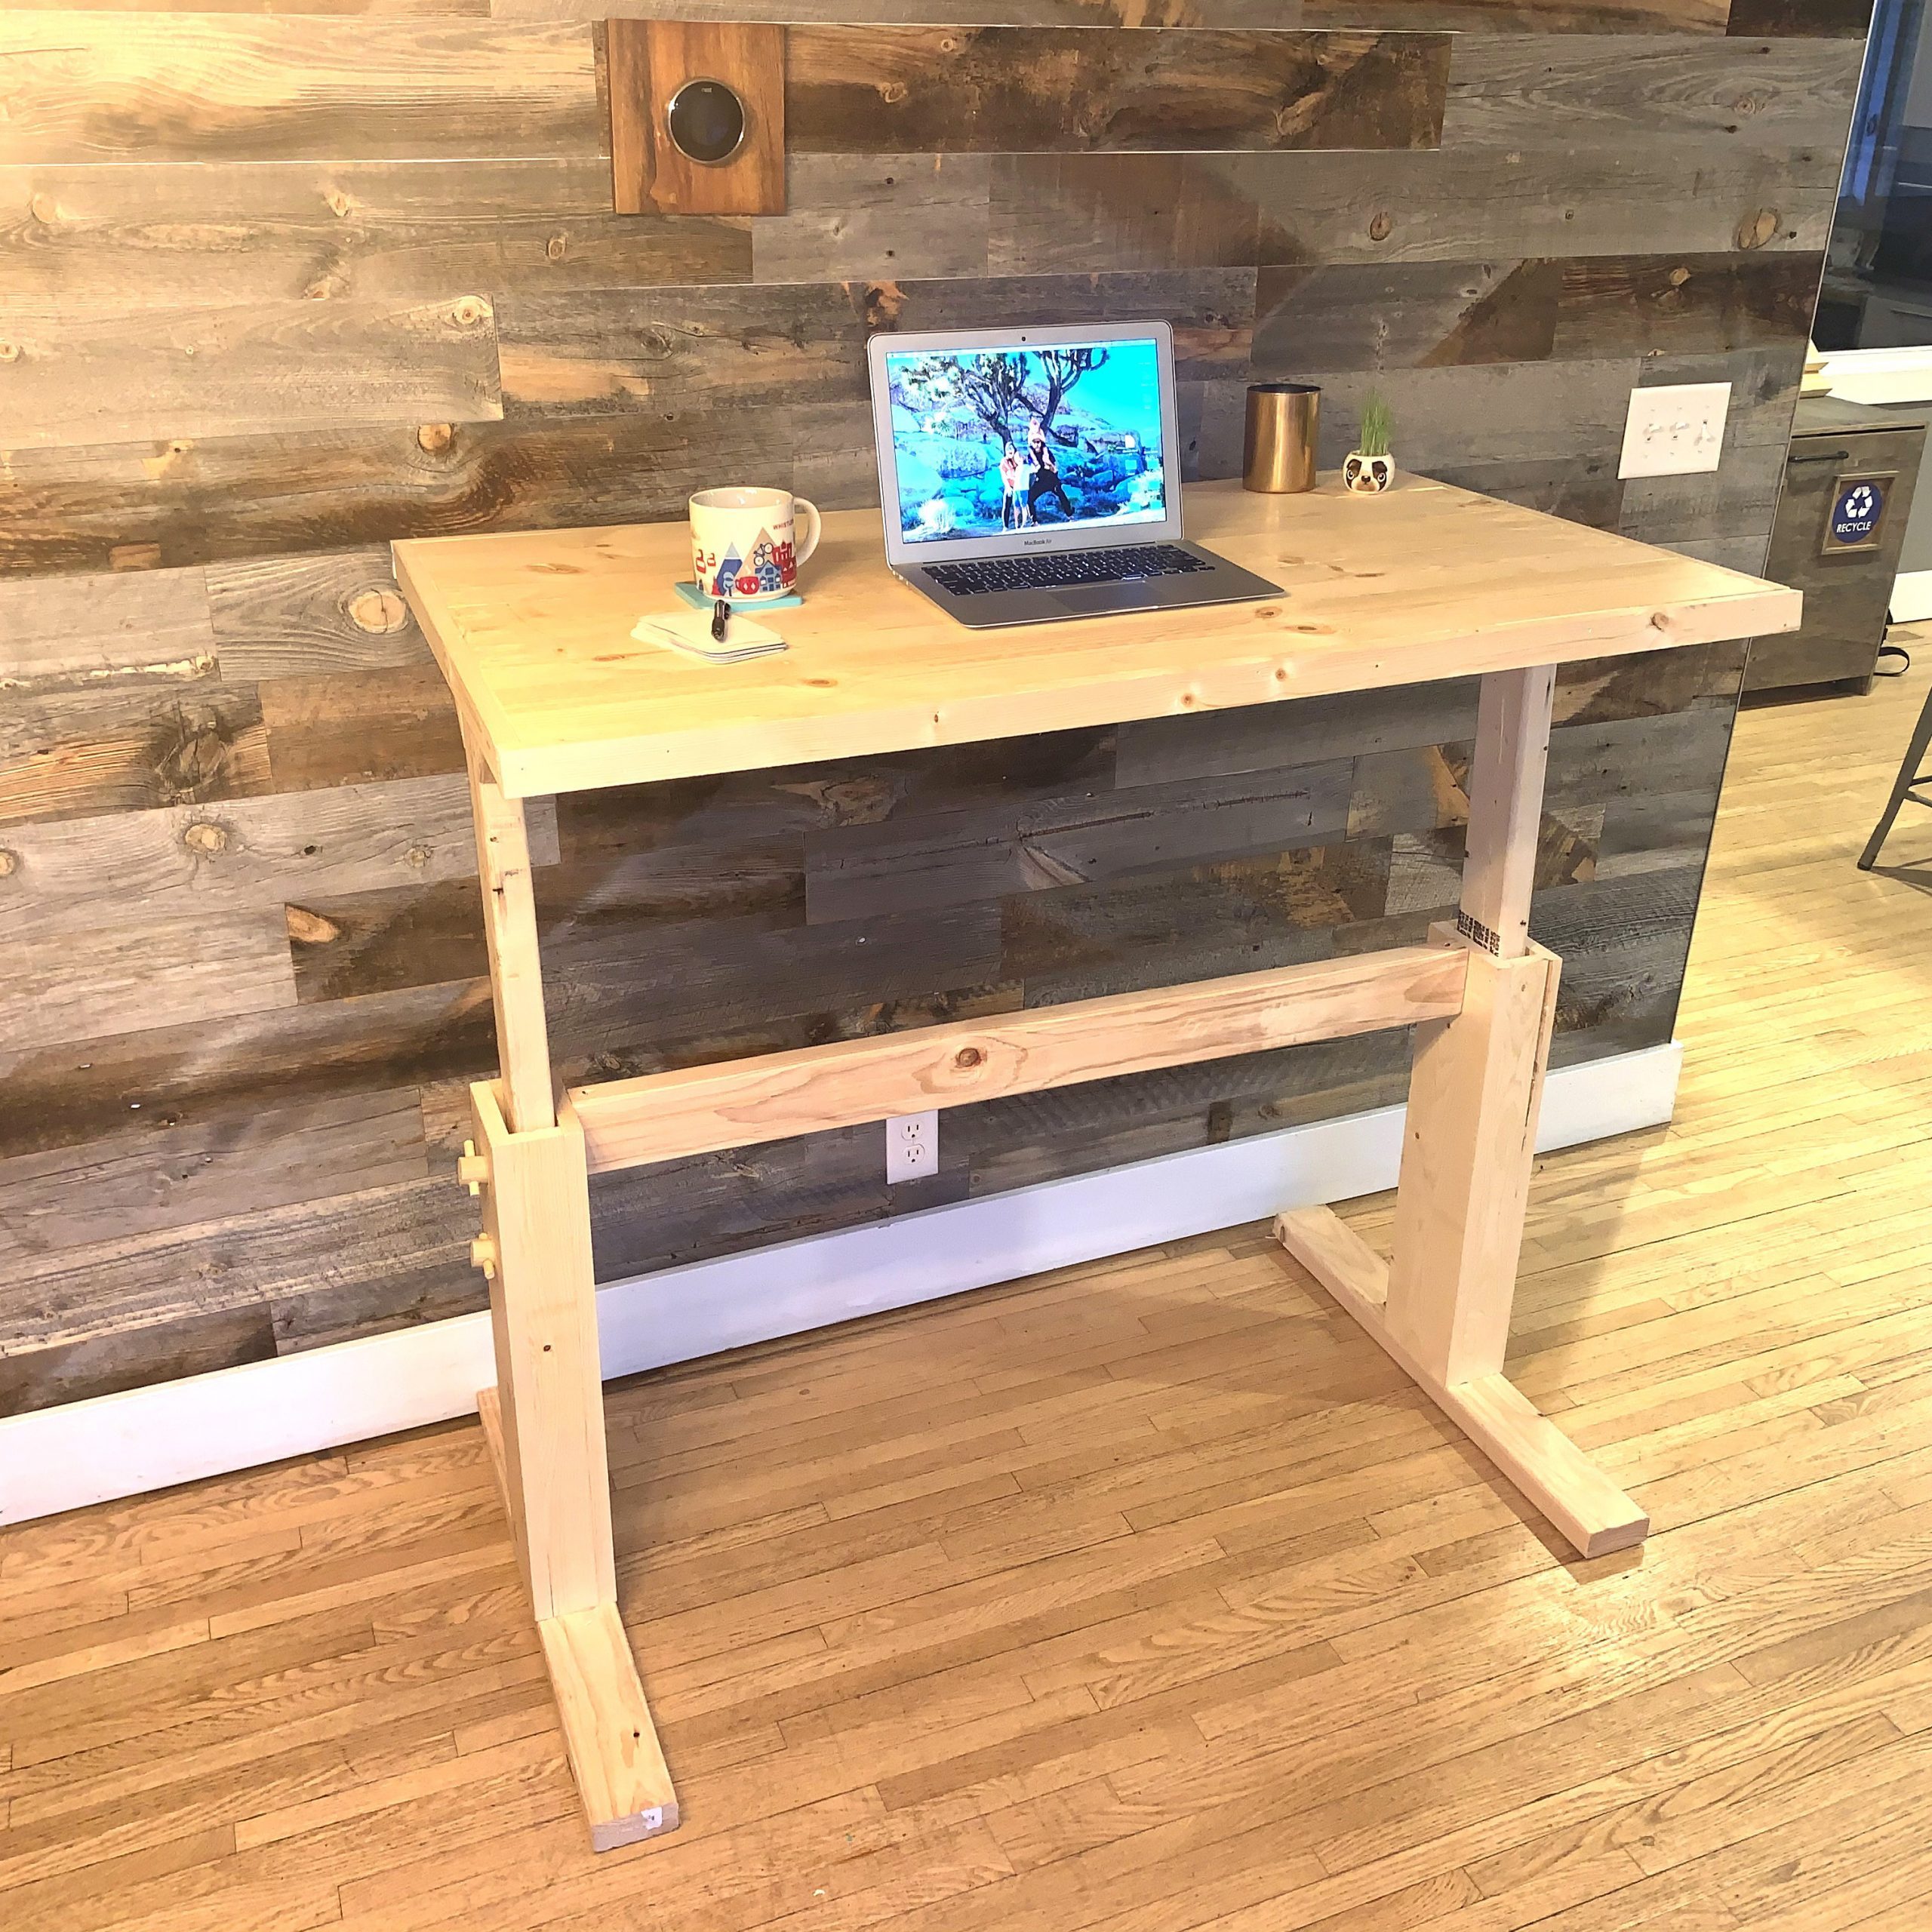 Sit Or Stand How To Make Your Own Adjustable Diy Desk The Family Handyman